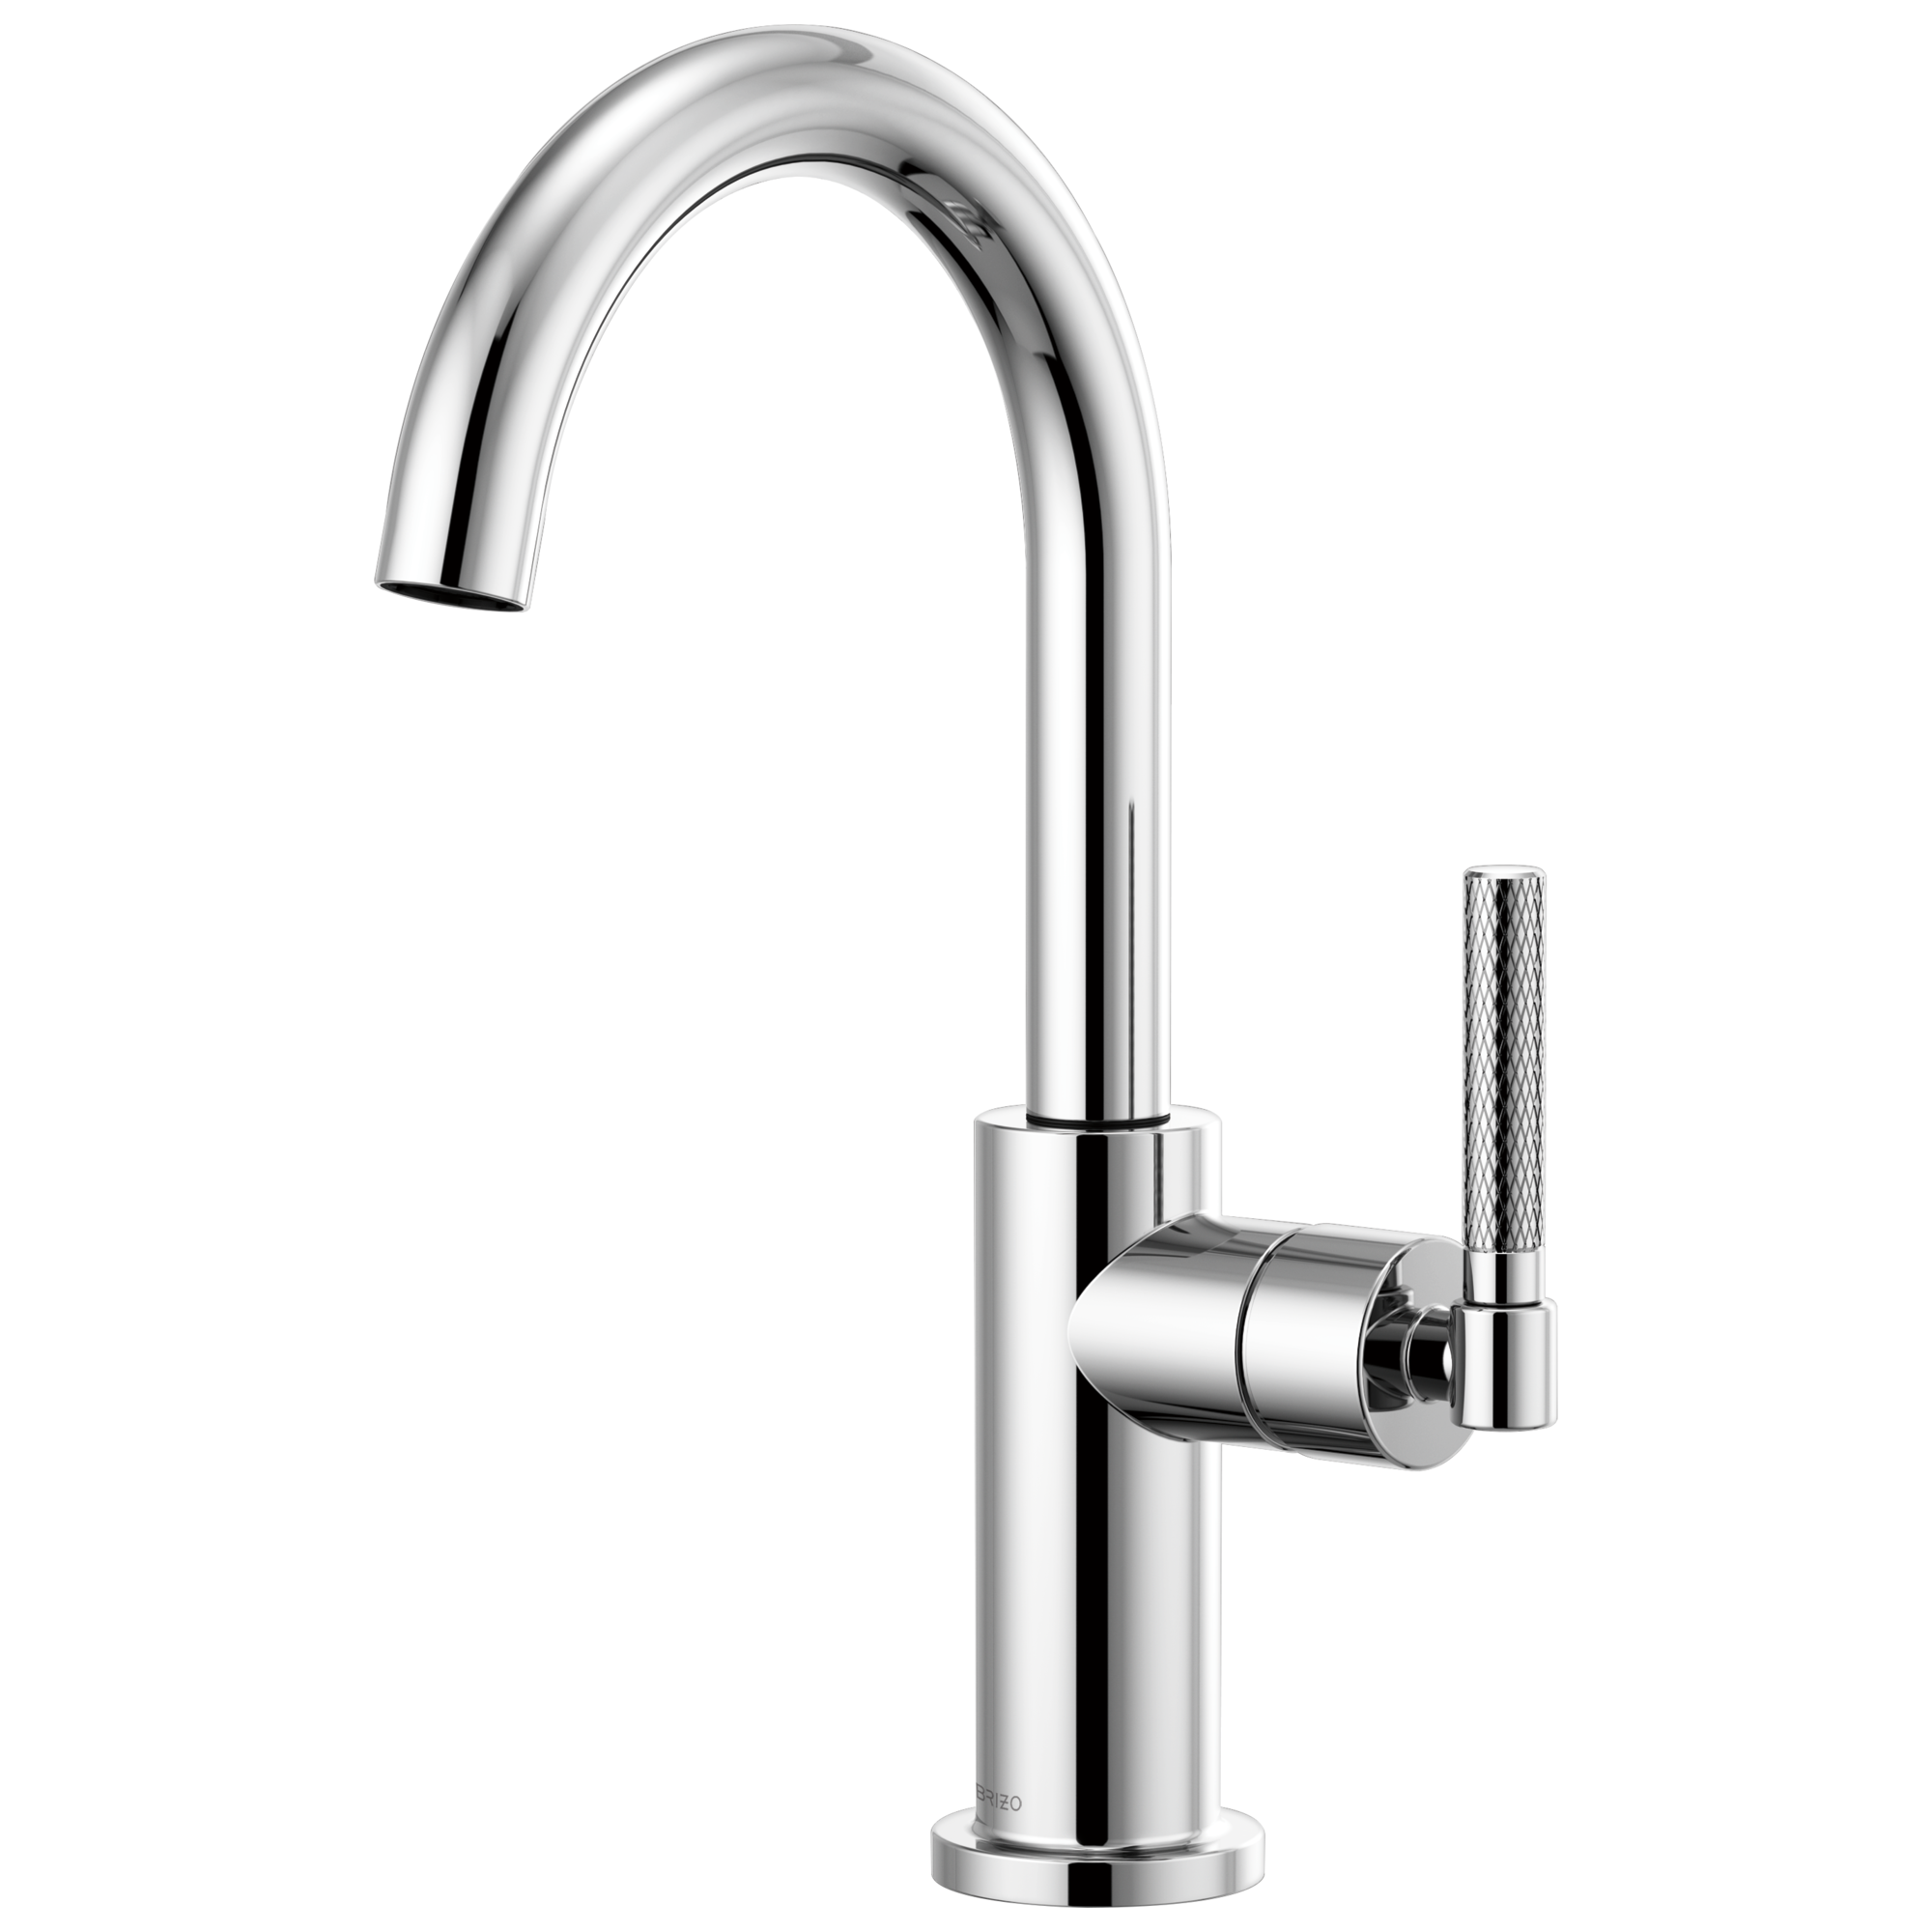 Brizo Litze: Bar Faucet with Arc Spout and Knurled Handle